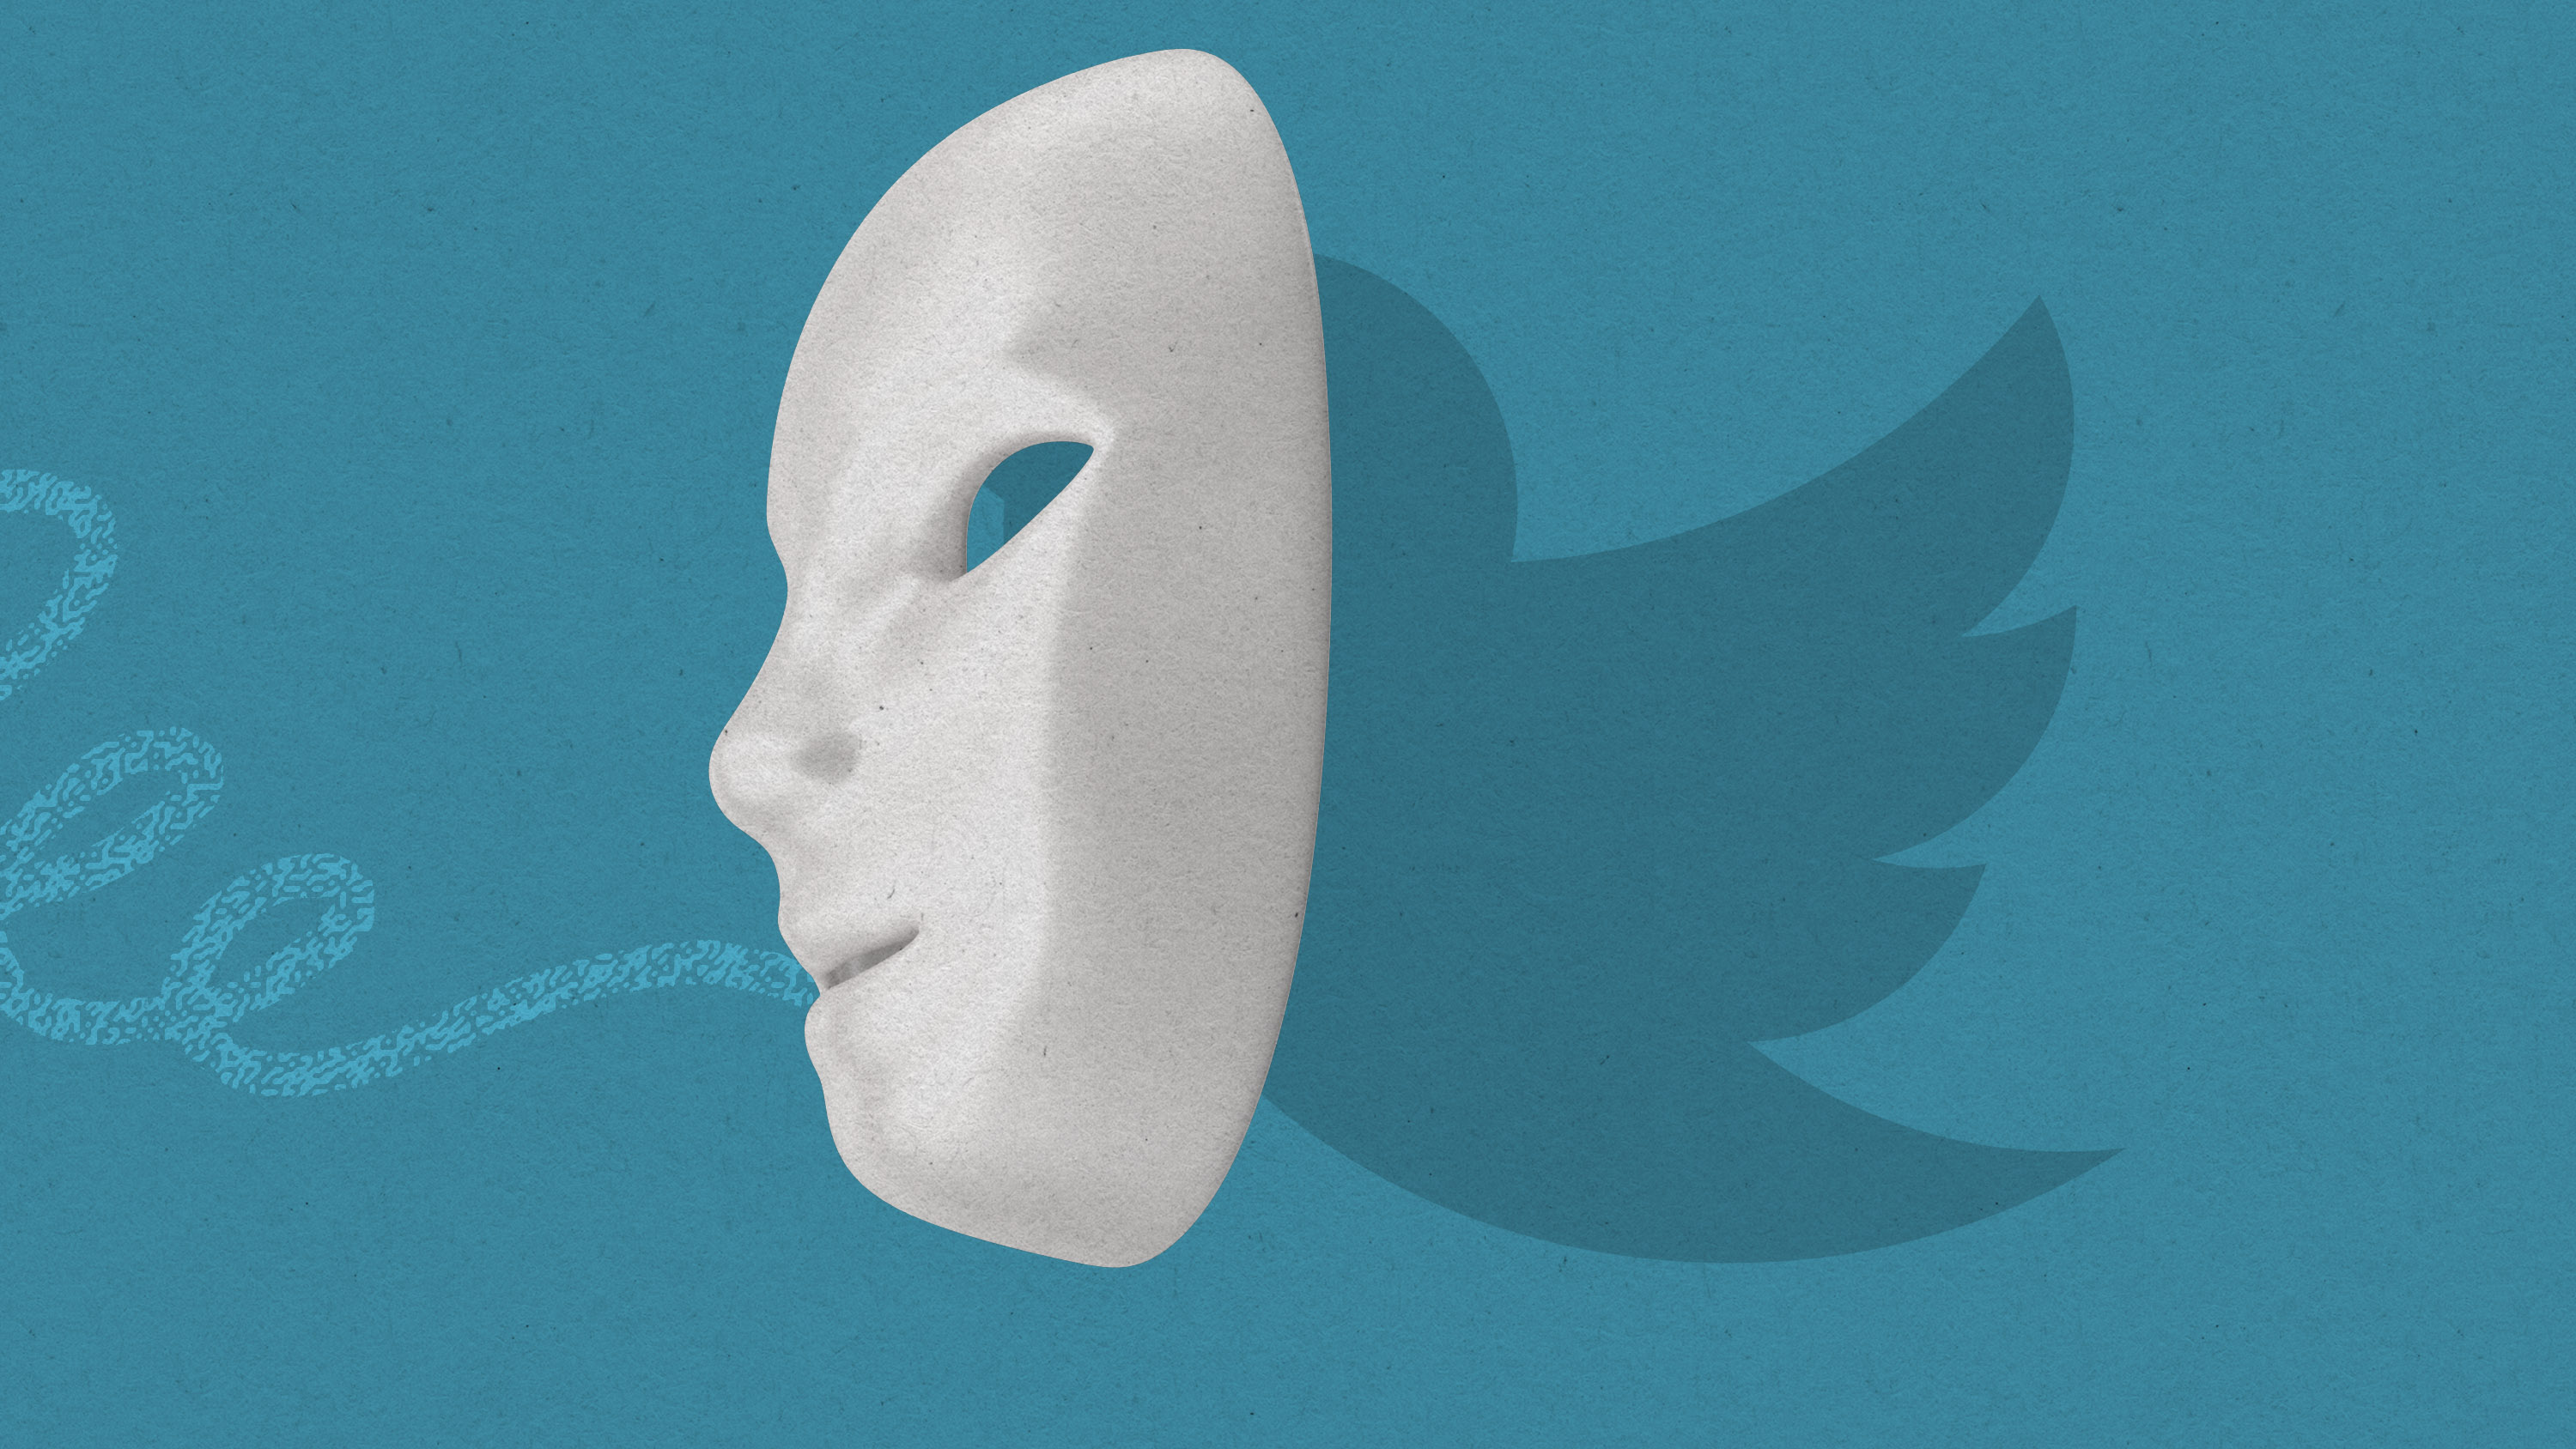 twitter logo partially obscured by a mask with a digital pattern emanating from its mouth